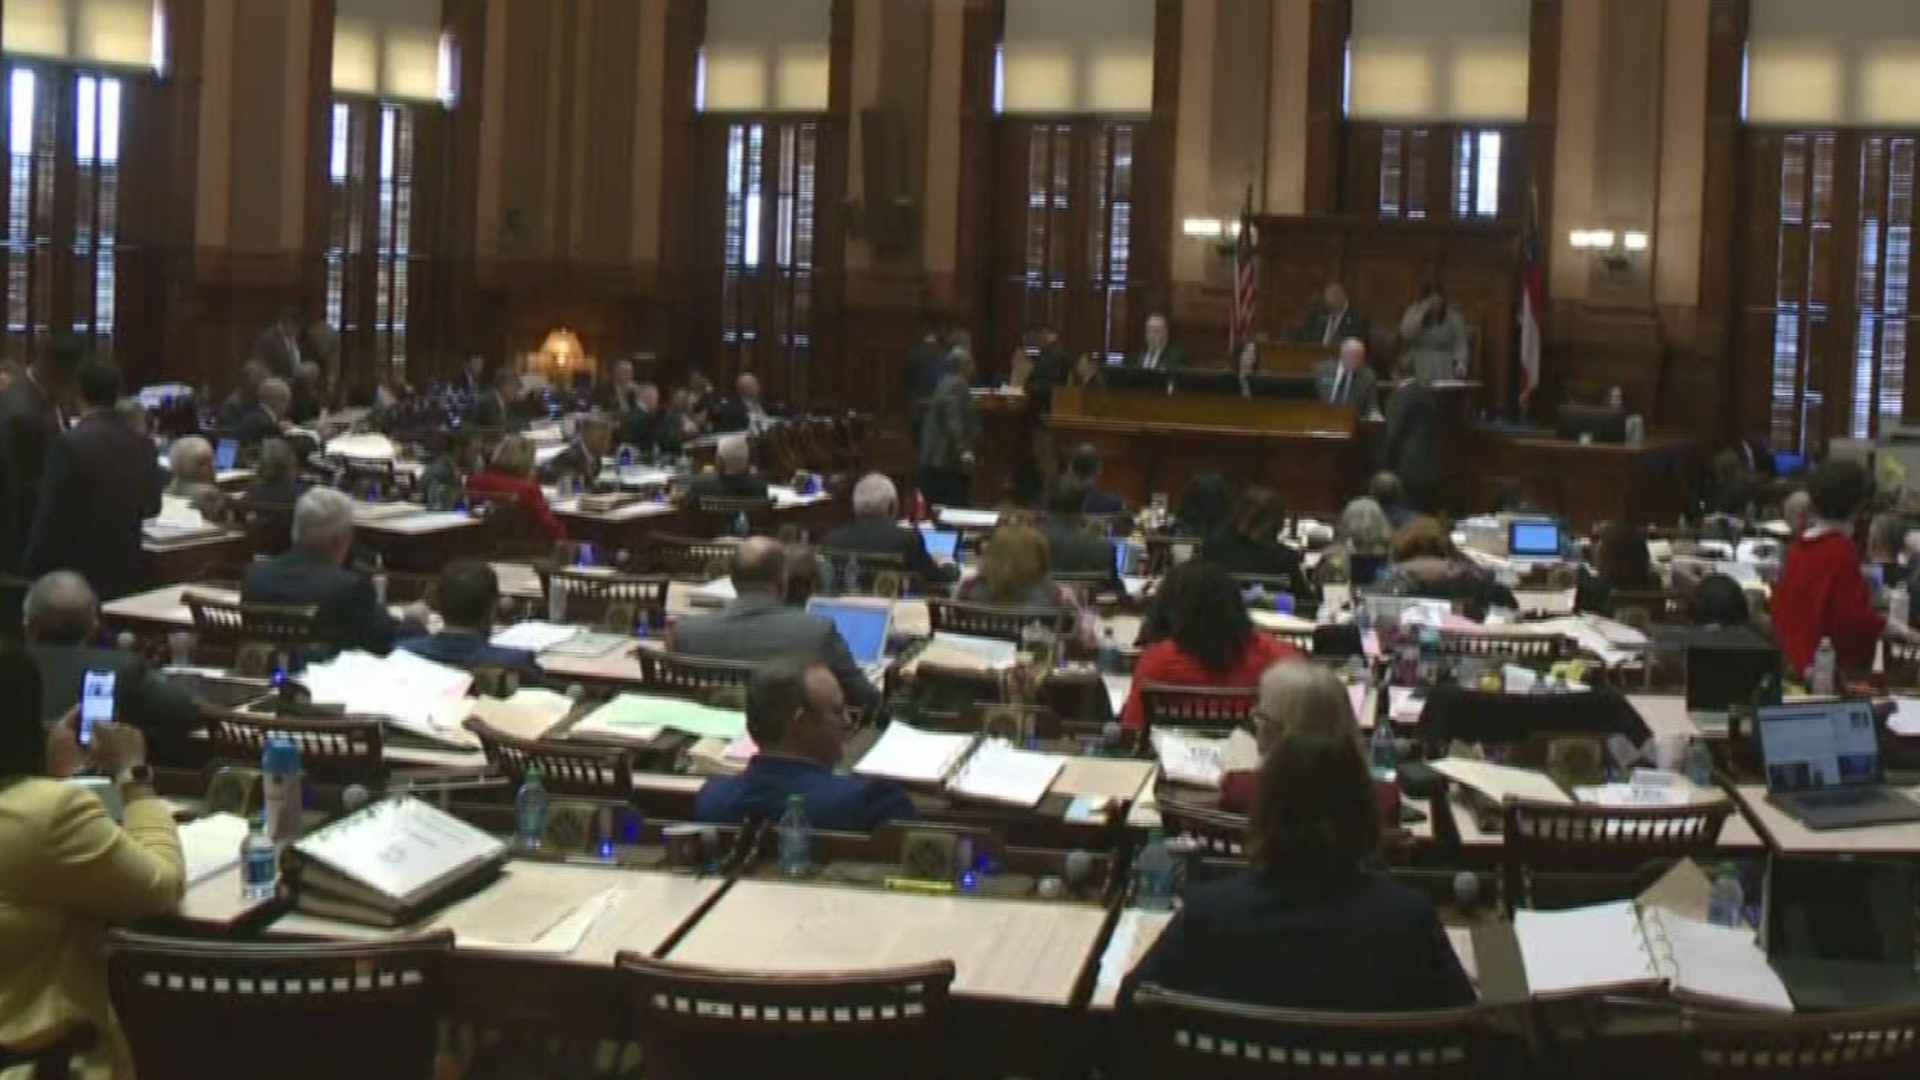 Georgia lawmakers are adapting their schedule due to the outbreak. They're suspending the legislative session starting next week, but plan to return later.